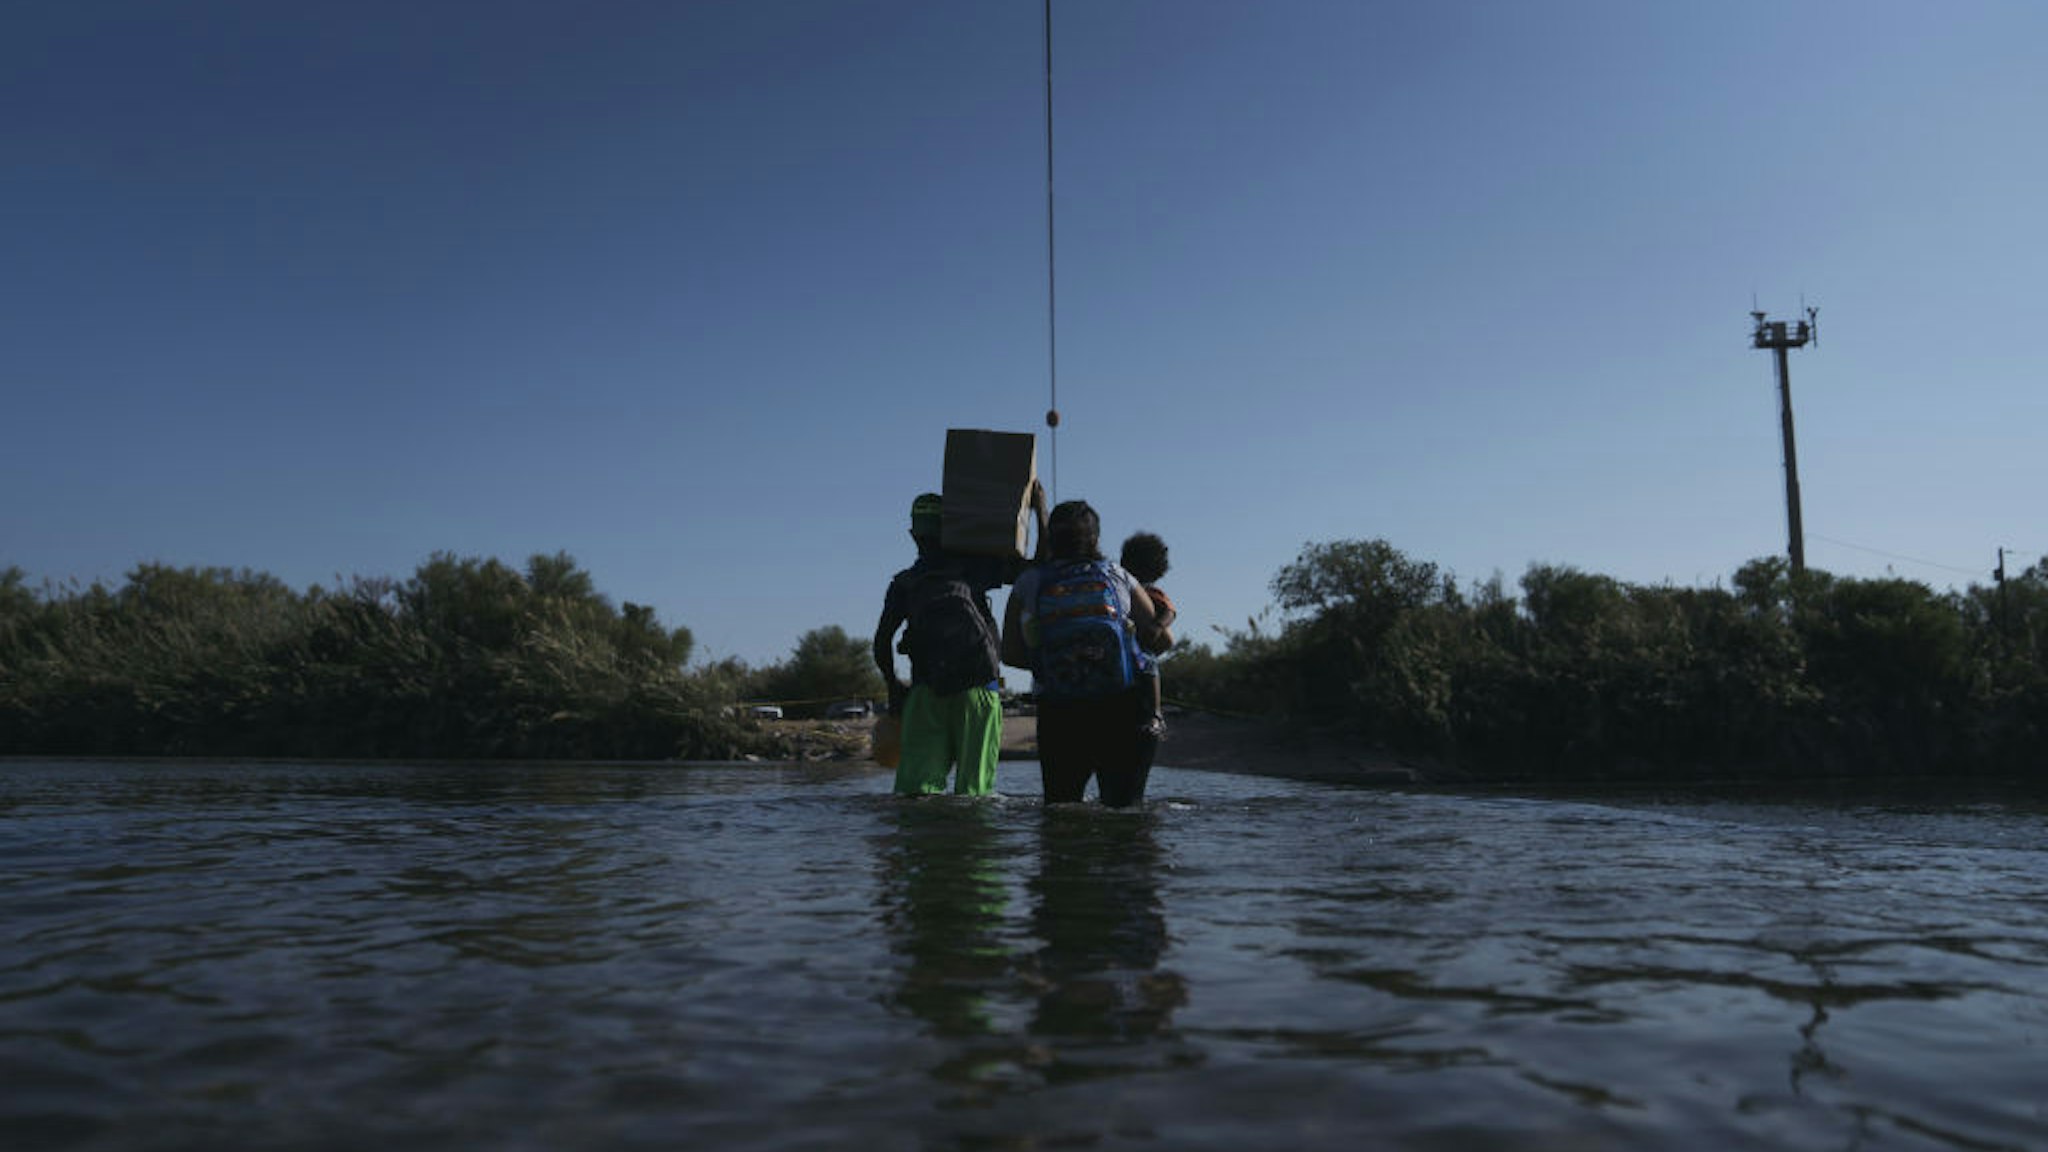 Migrants cross the Rio Grande River near the Del Rio-Acuna Port of Entry in Ciudad Acuna, Coahuila state, Mexico, on Sunday, Sept. 19, 2021. U.S. officials plan to expel Thousands of Haitian migrants that arrived at the small Texas city of Del Rio this week. Photographer: Eric Thayer/Bloomberg via Getty Images